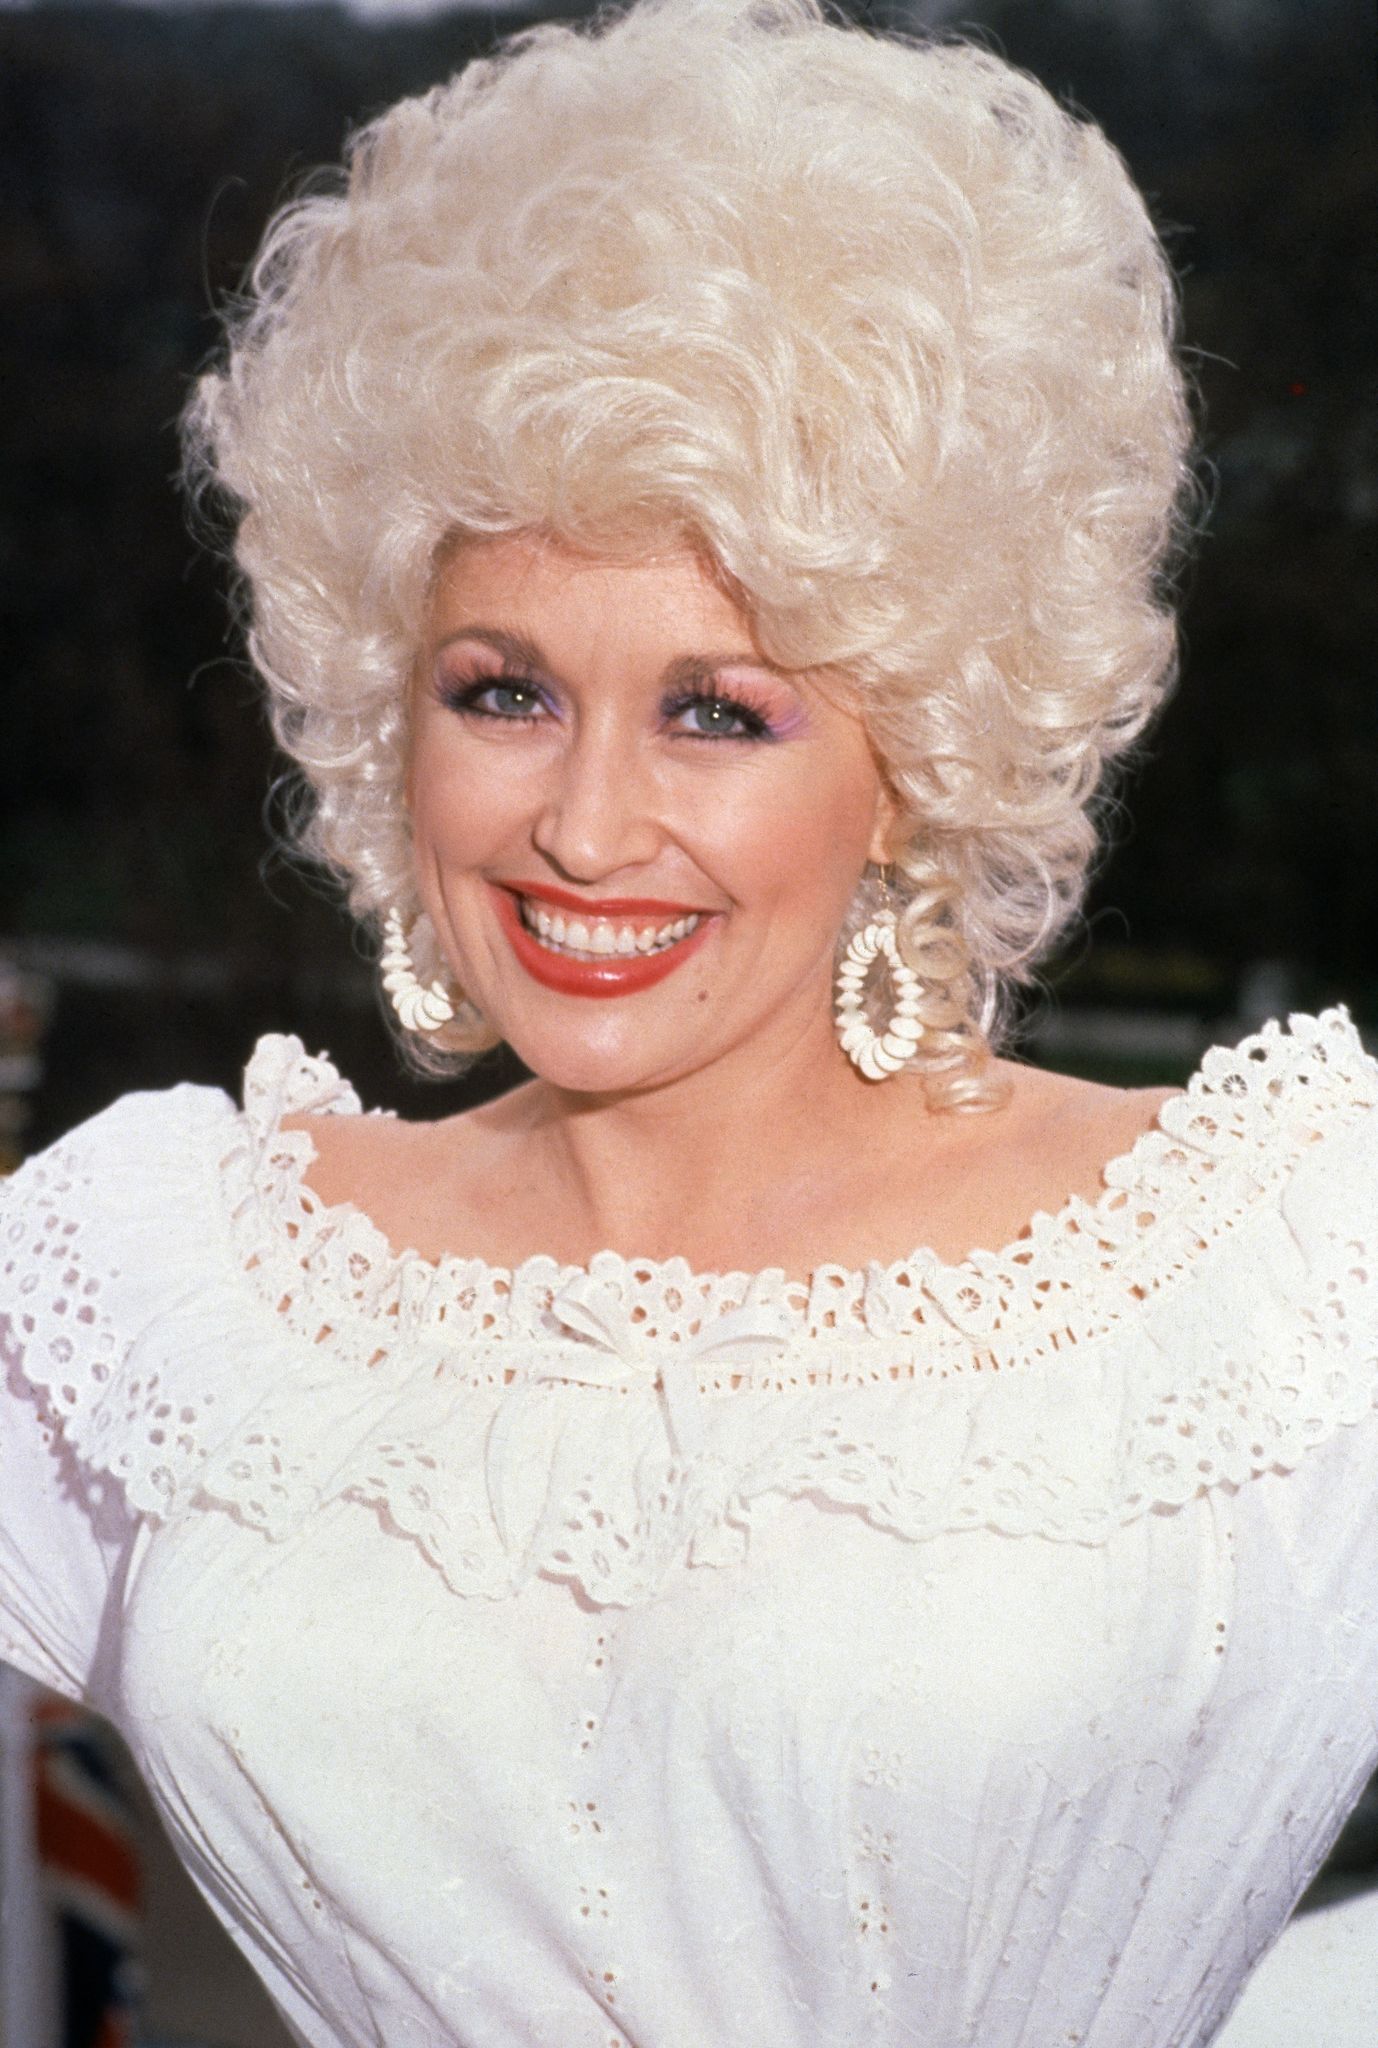 A portrait of American country singer-songwriter Dolly Parton in London, 1983. | Photo: Getty Images